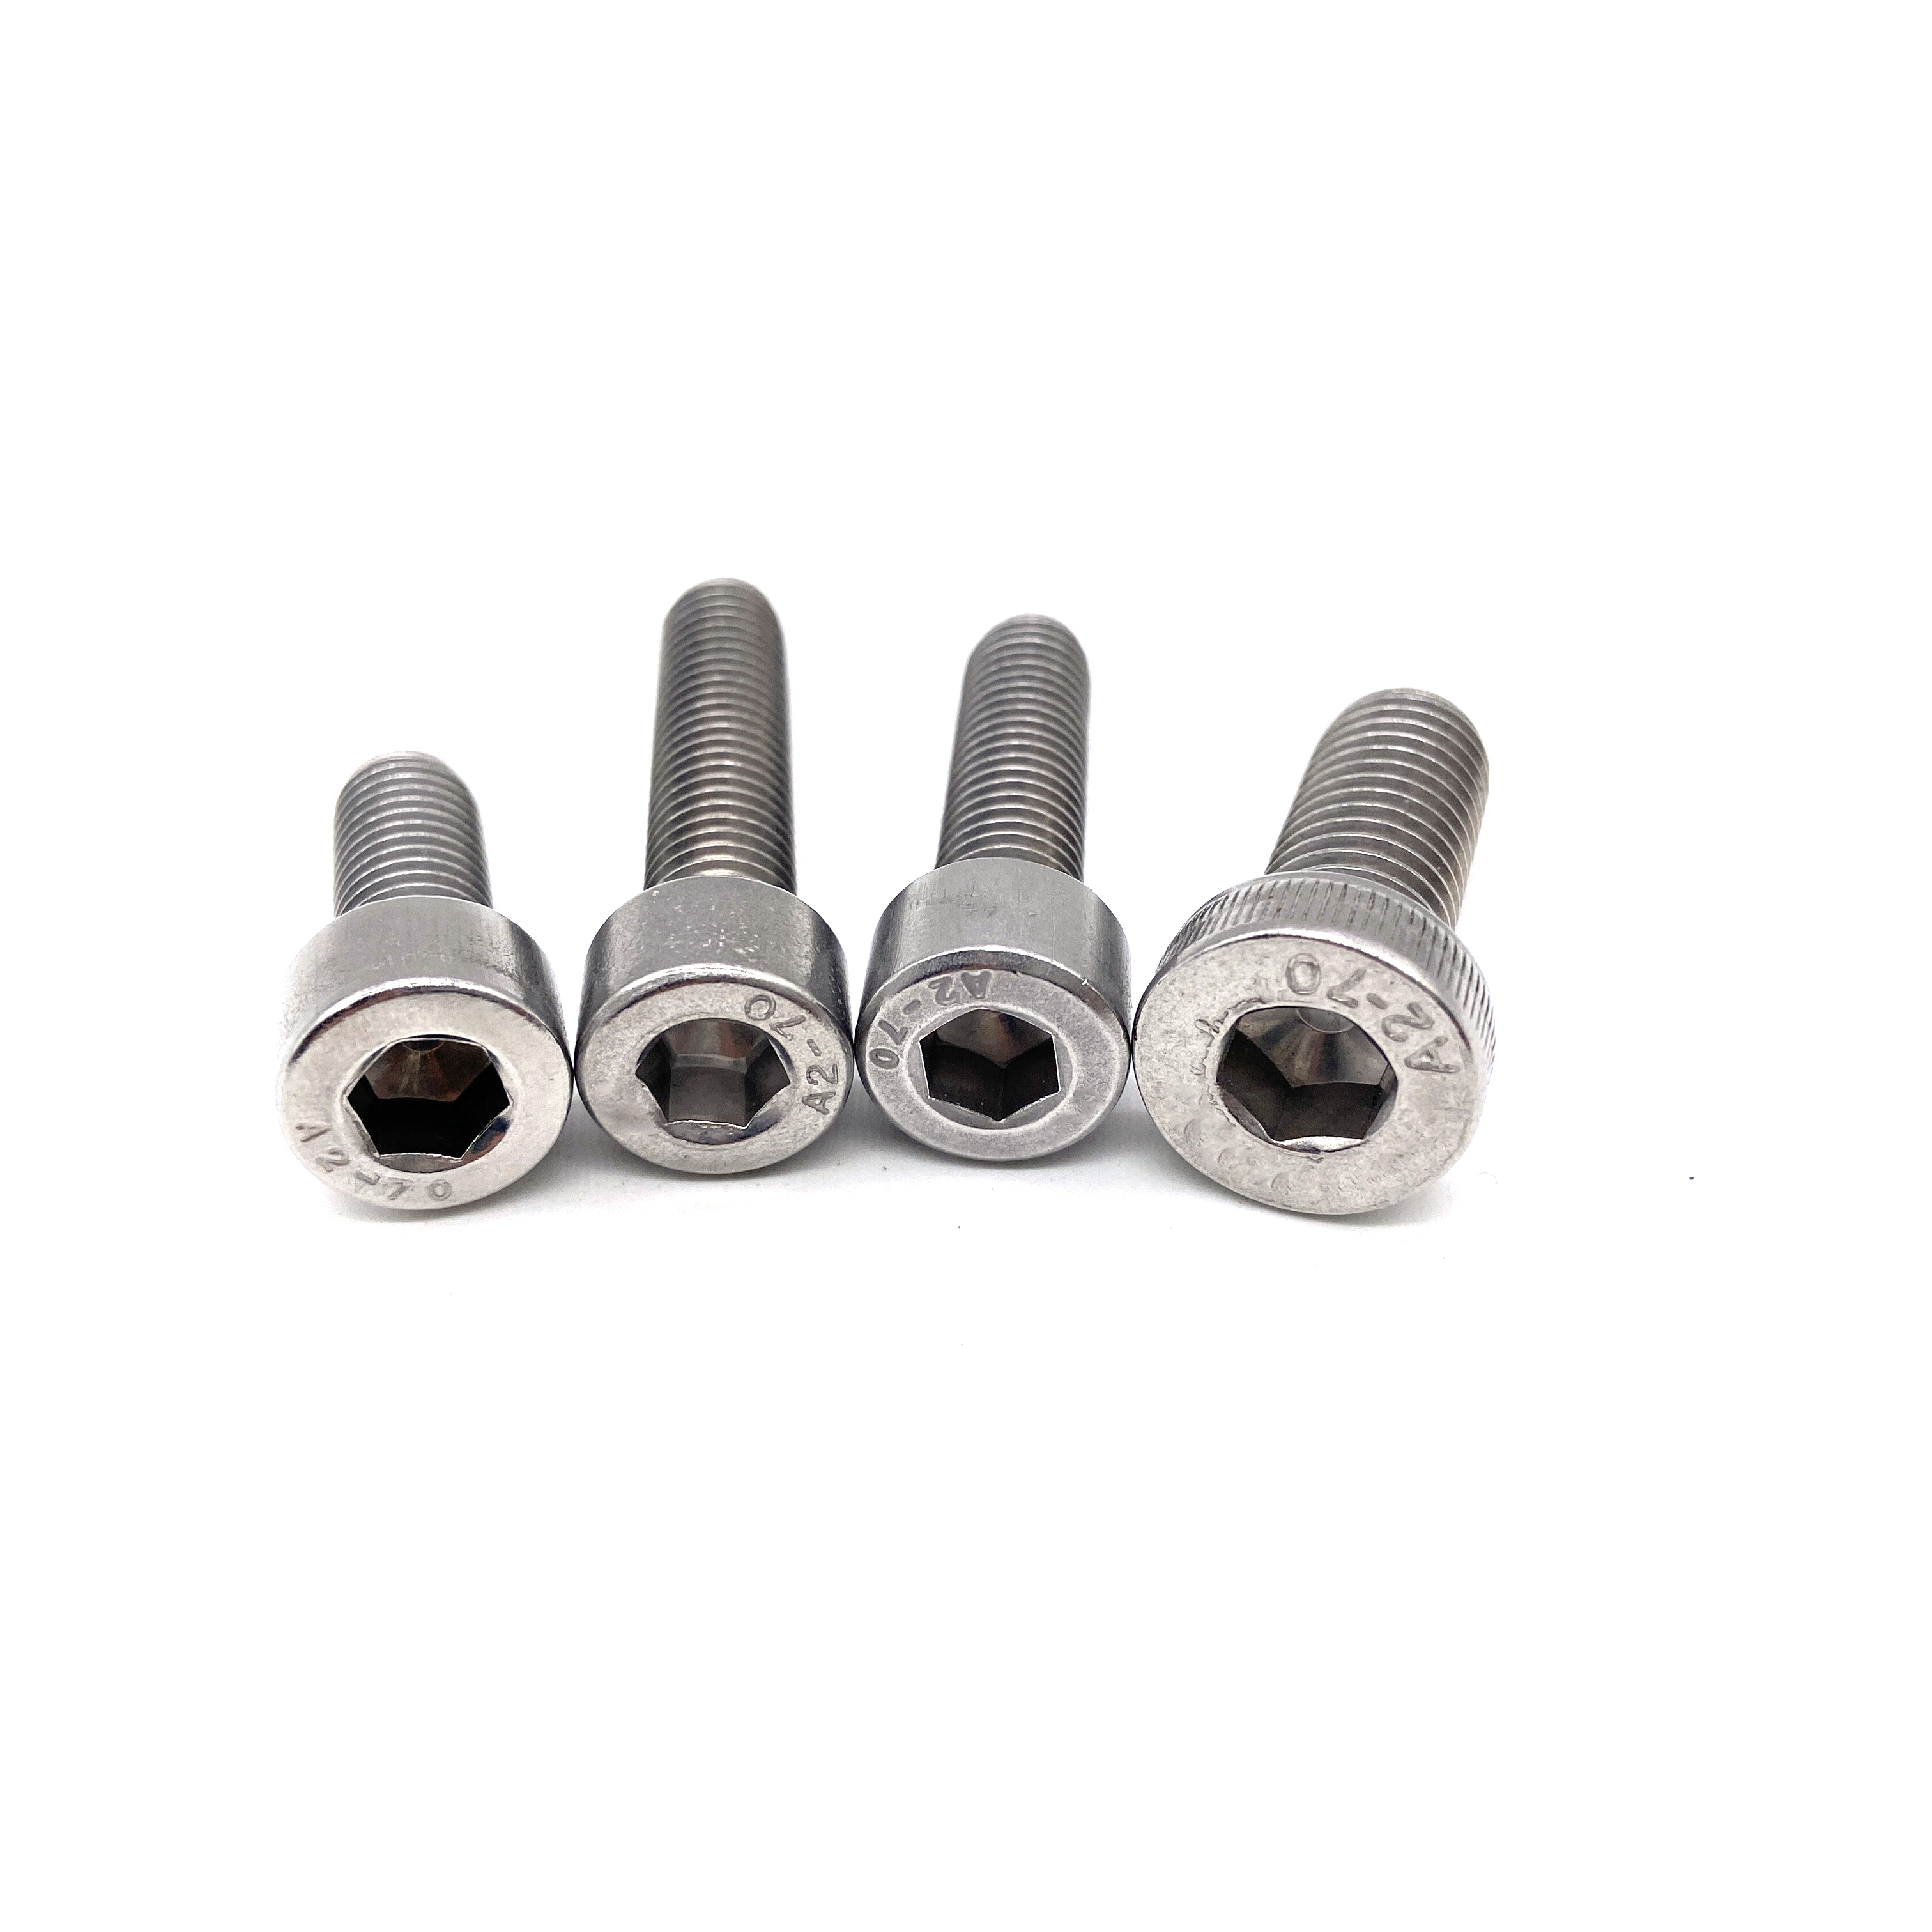  A4-80 A2-70 Stainless Steel 304 316 Socket Head Full Thread Bolts